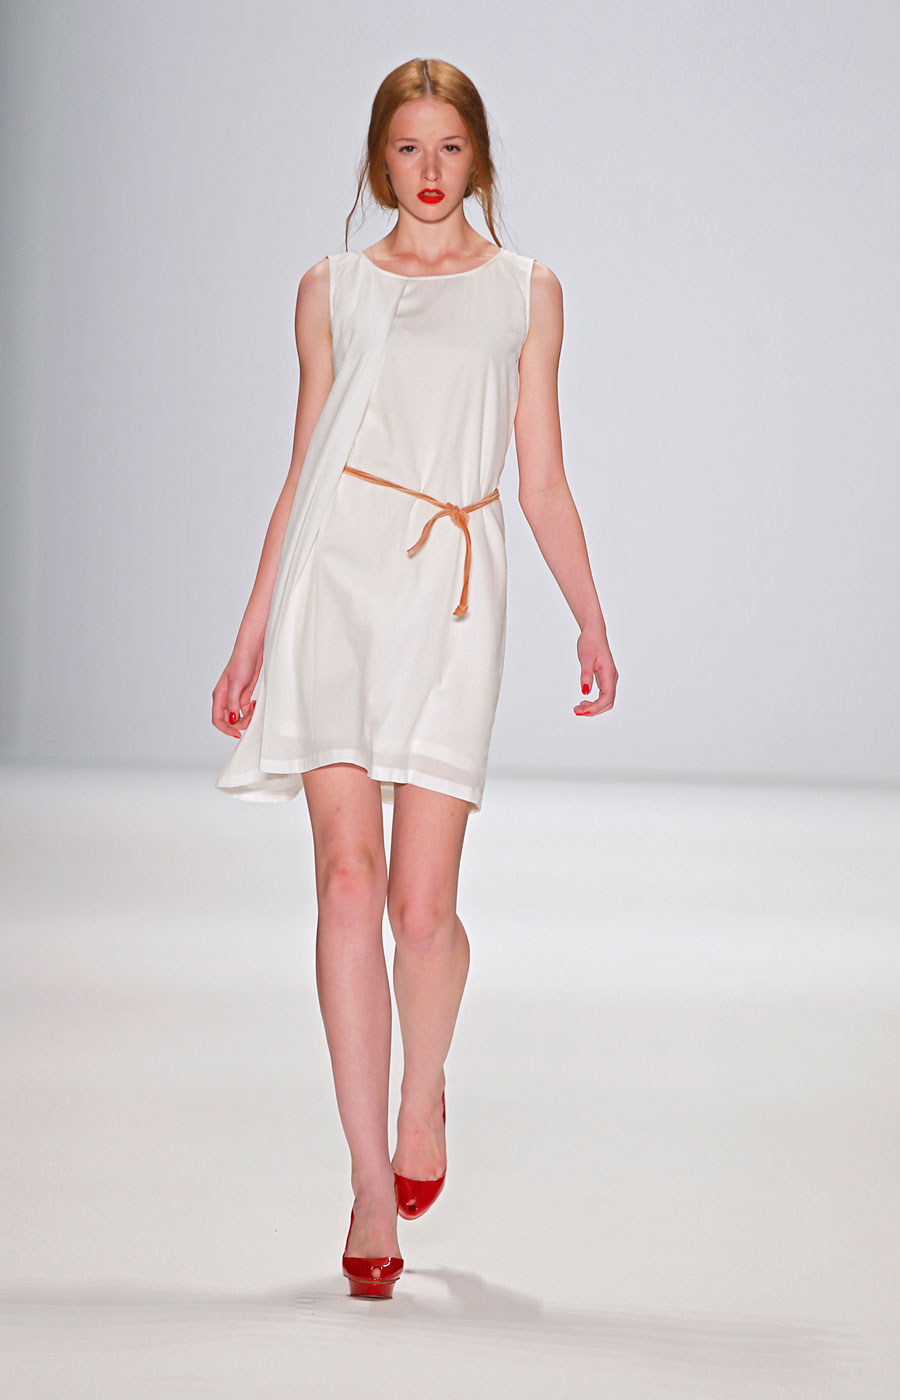 Spring/Summer 2012 by Hien Le (9)